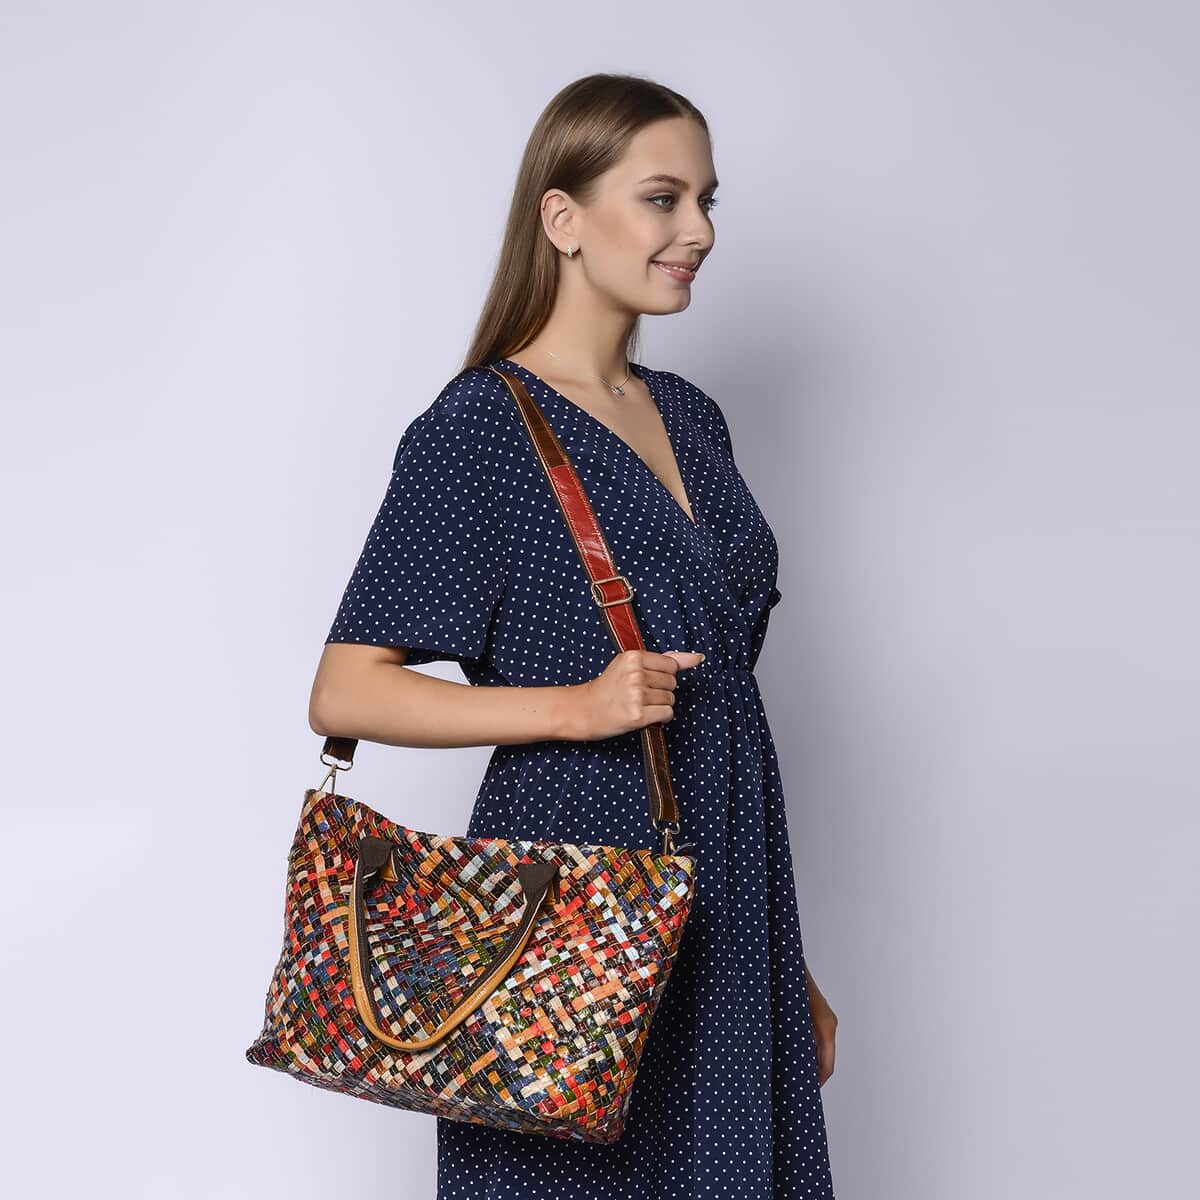 CHAOS BY ELSIE Multi Color Weave Pattern Genuine Leather Convertible Tote Bag image number 1